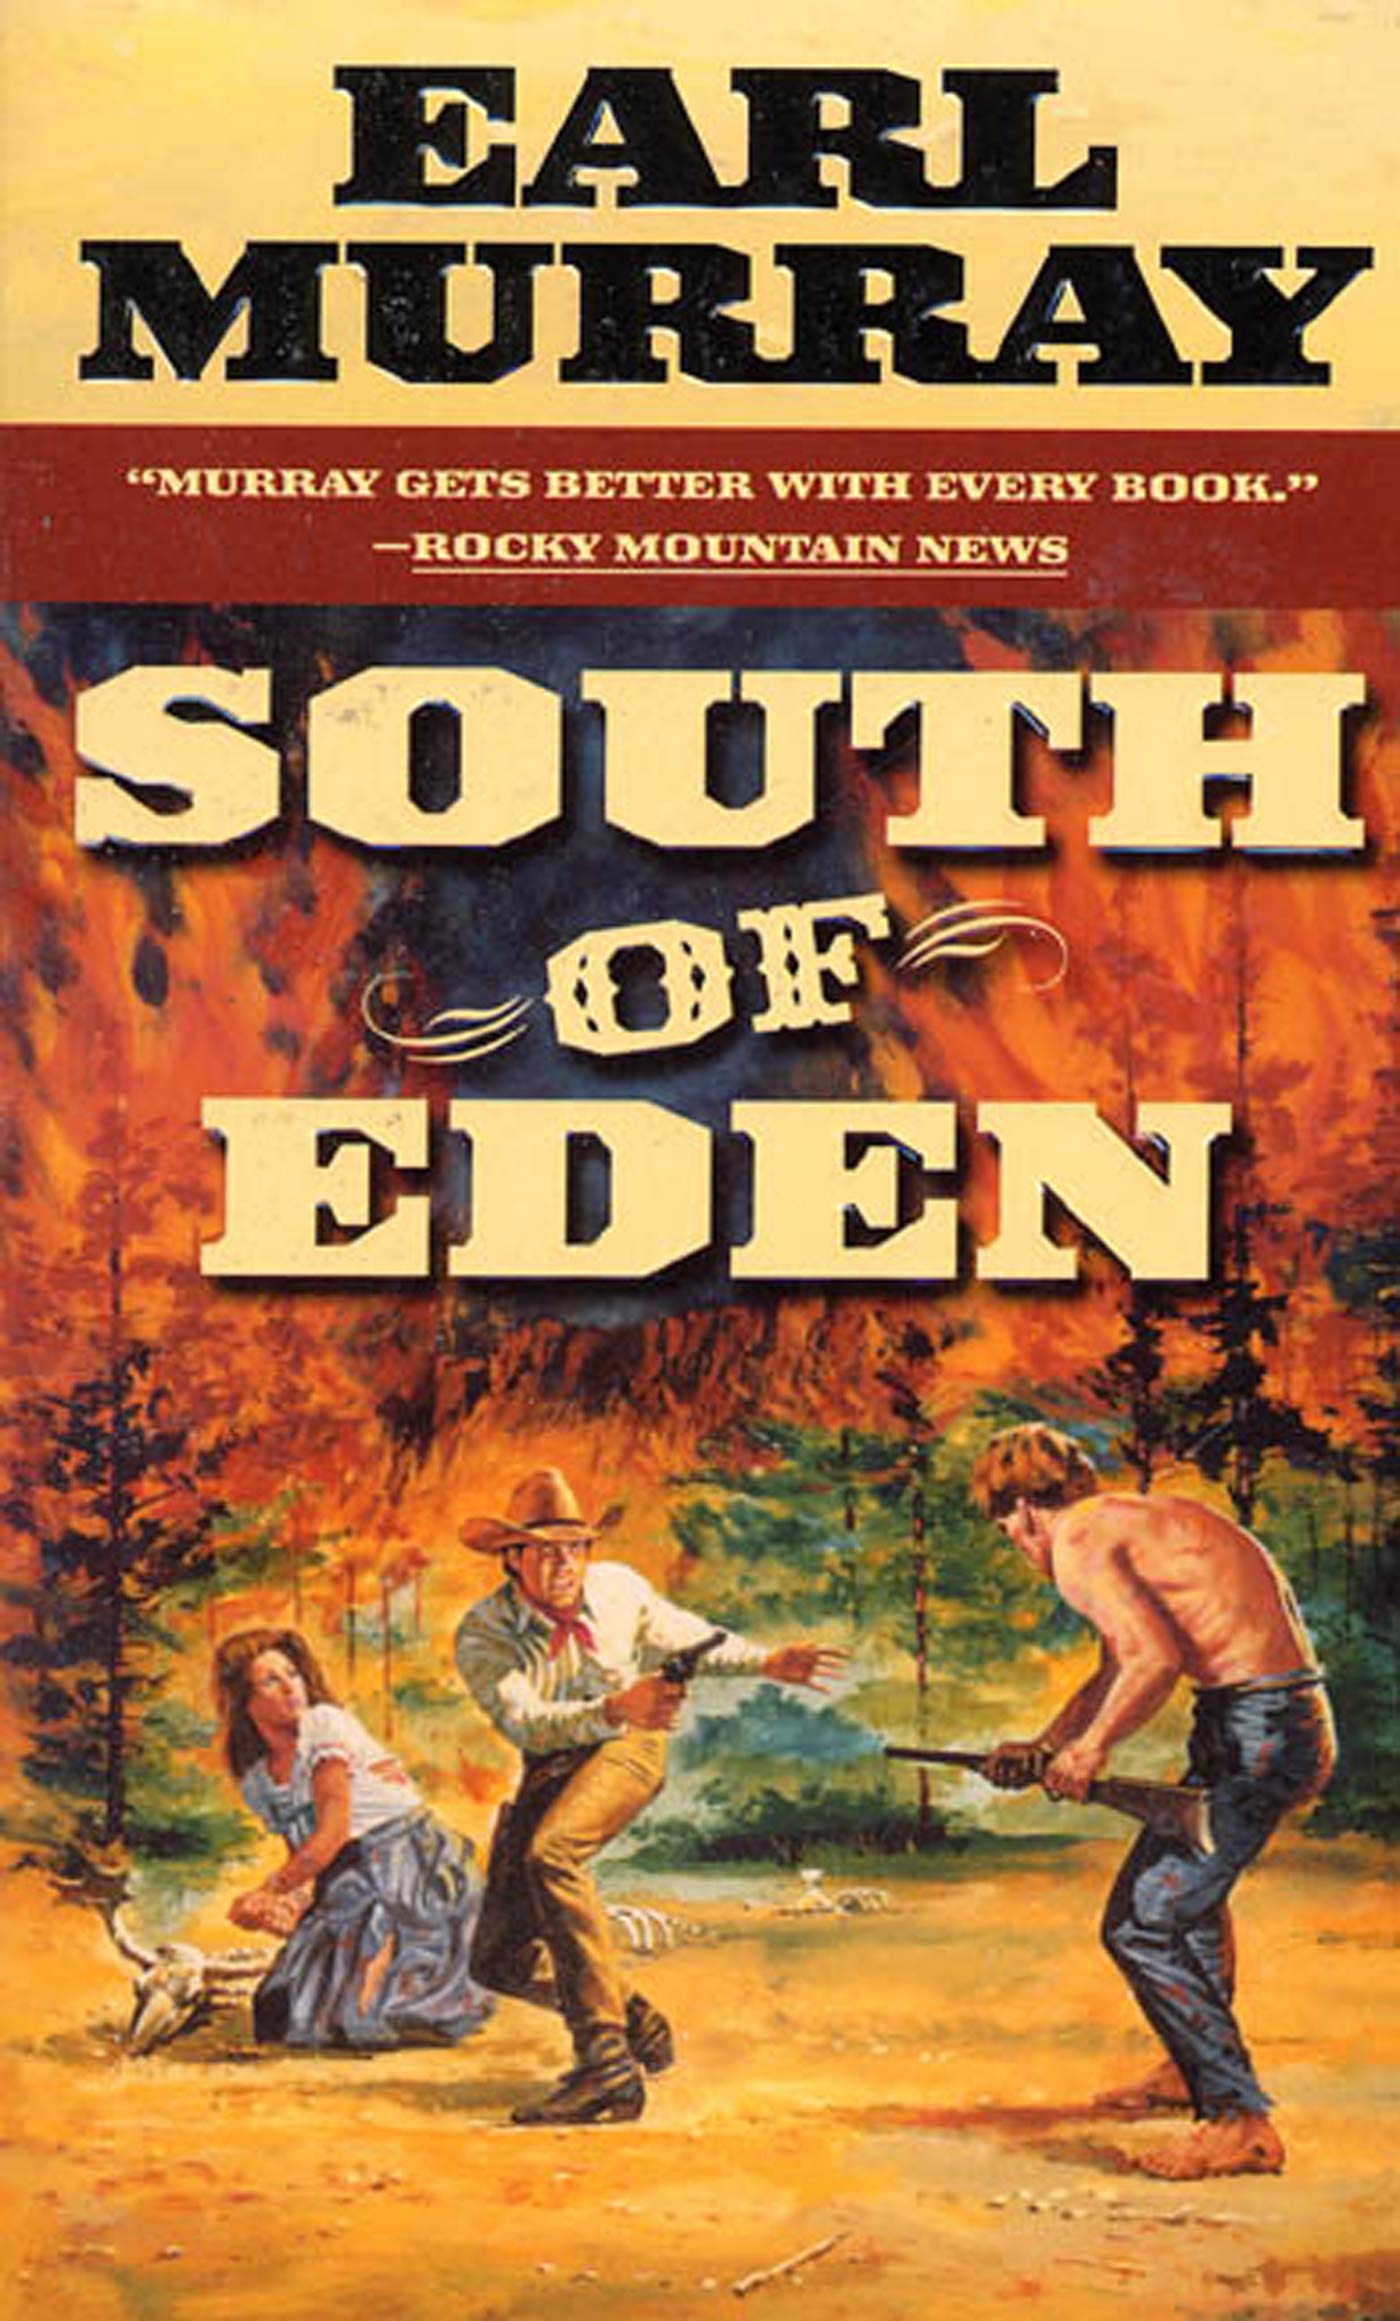 South of Eden by Earl Murray